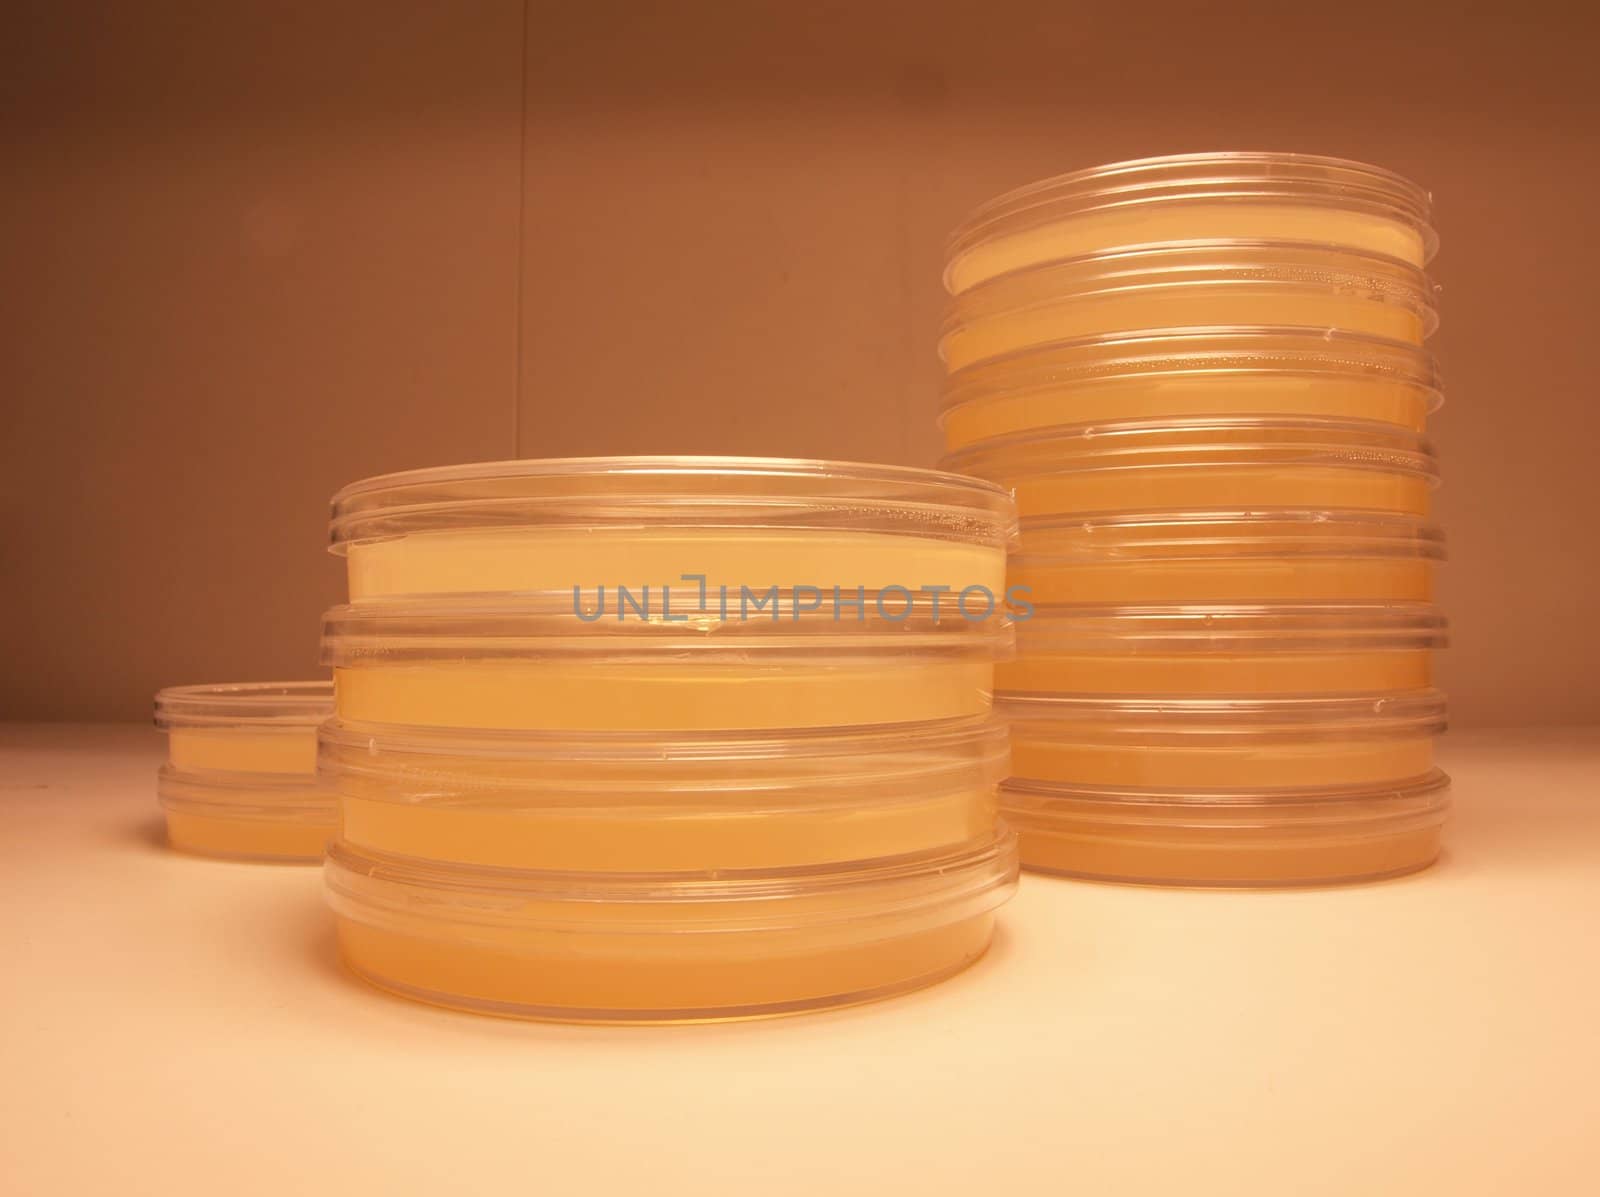 Clinical test plates containing agar for bacterial colony growth